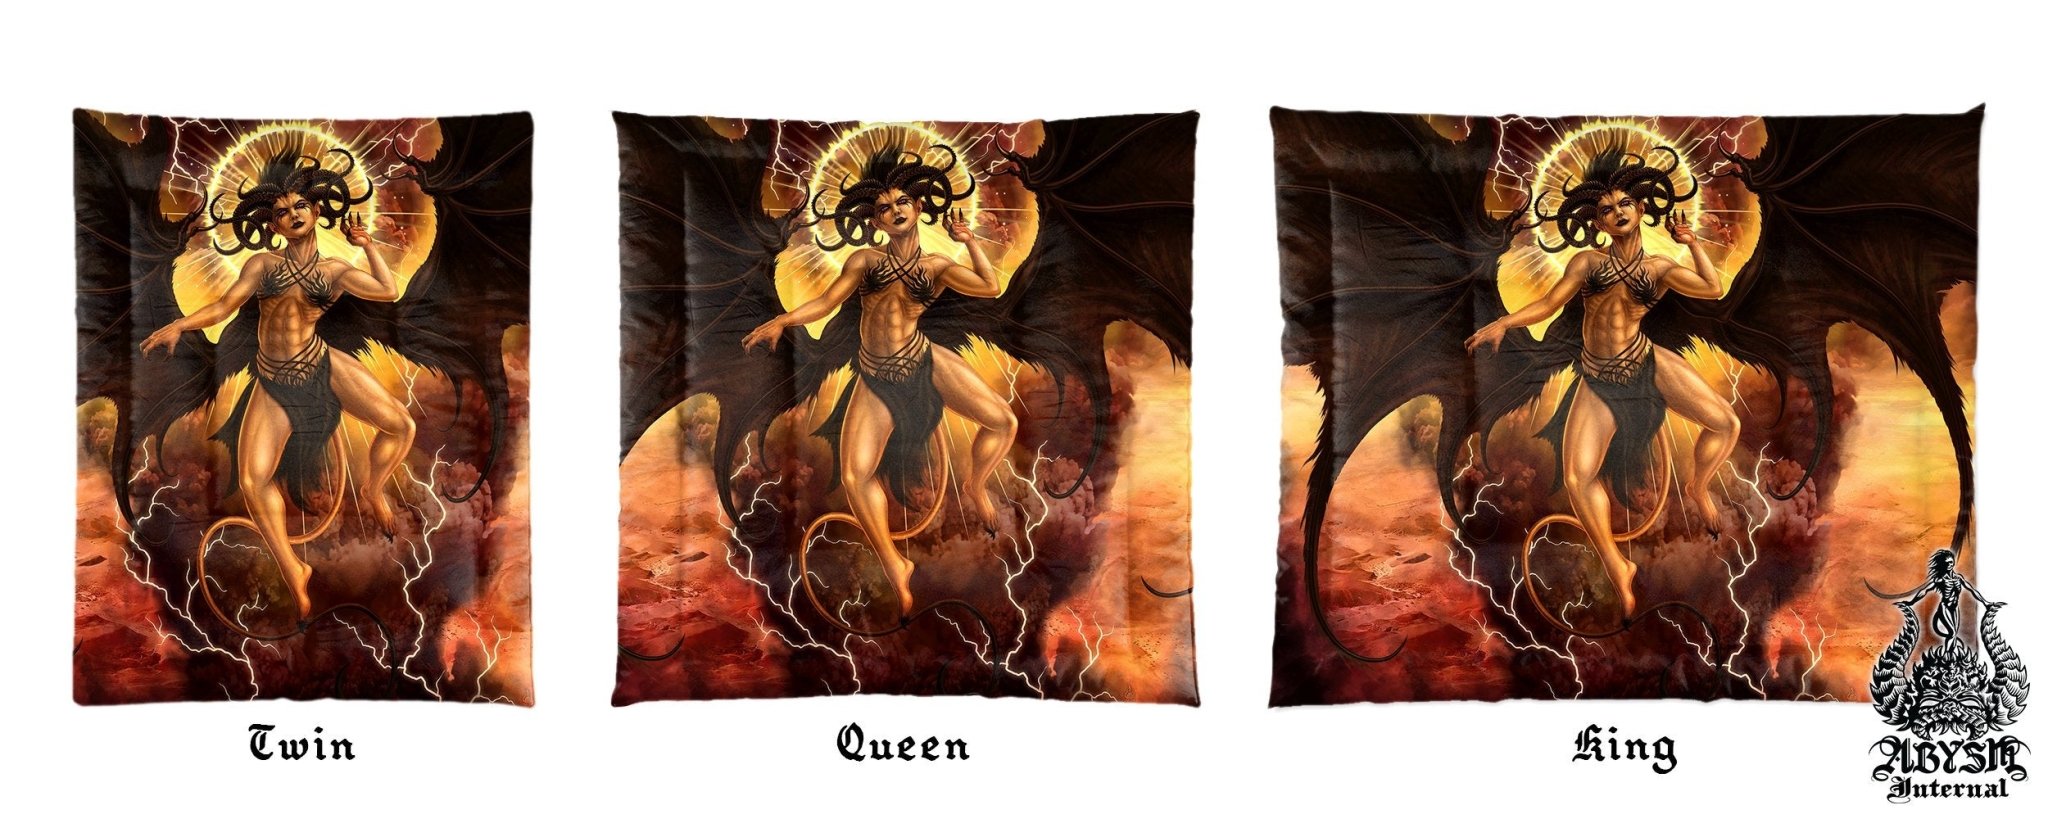 Lilith Bedding Set, Comforter and Duvet, Satanic Demon Art, Alternative Bed Cover and Bedroom Decor, King, Queen and Twin Size - Clothed - Abysm Internal